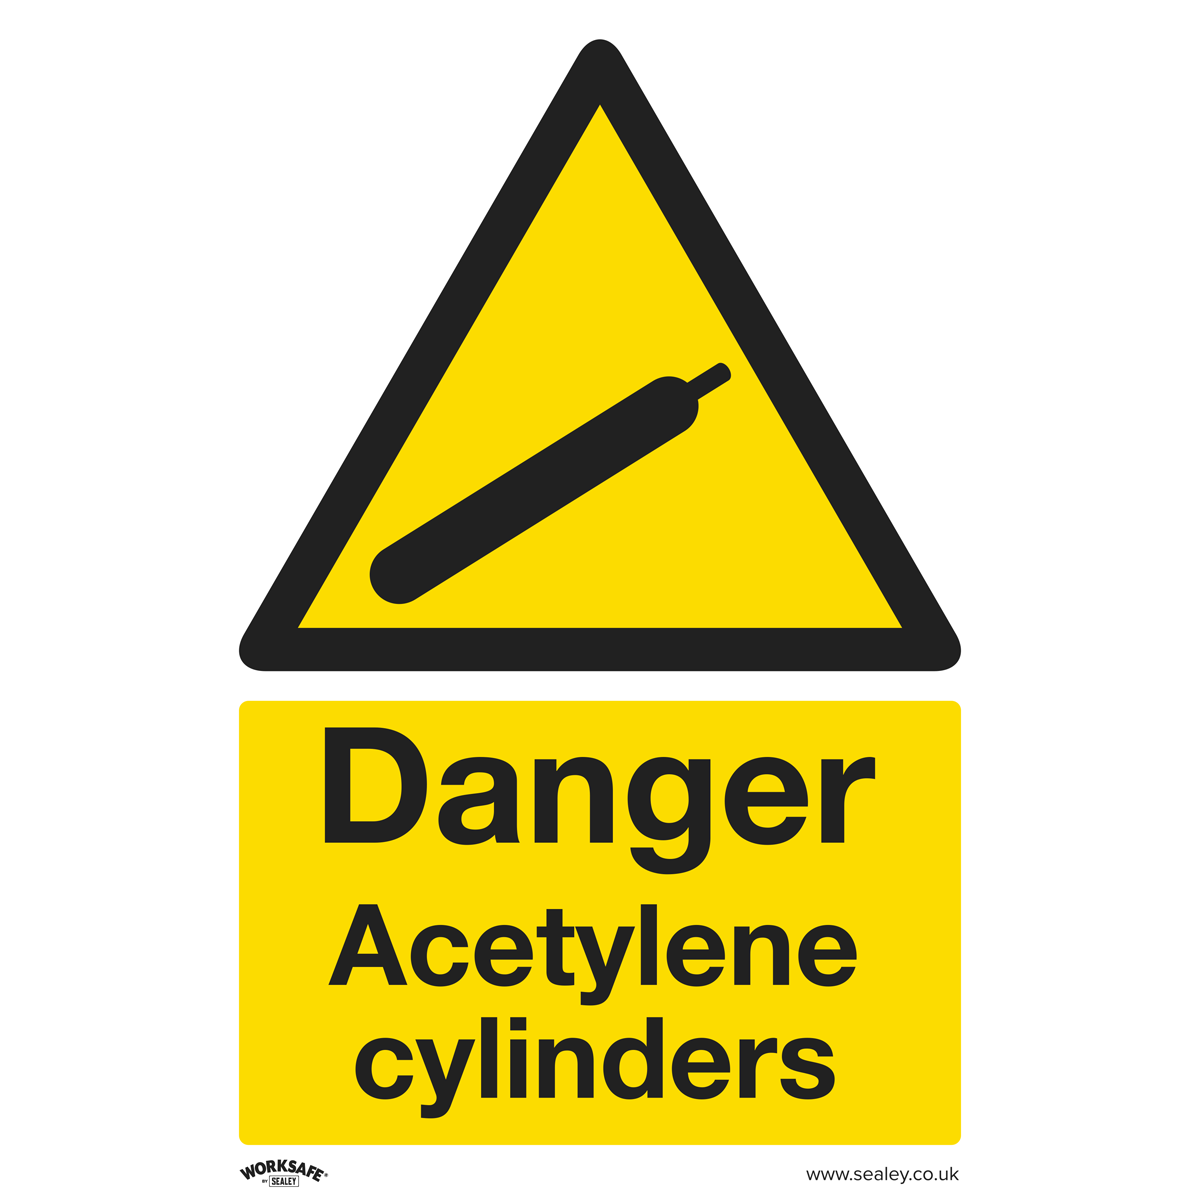 Sealey Warning Safety Sign - Danger Acetylene Cylinders - Self-Adhesive Vinyl - Pack of 10